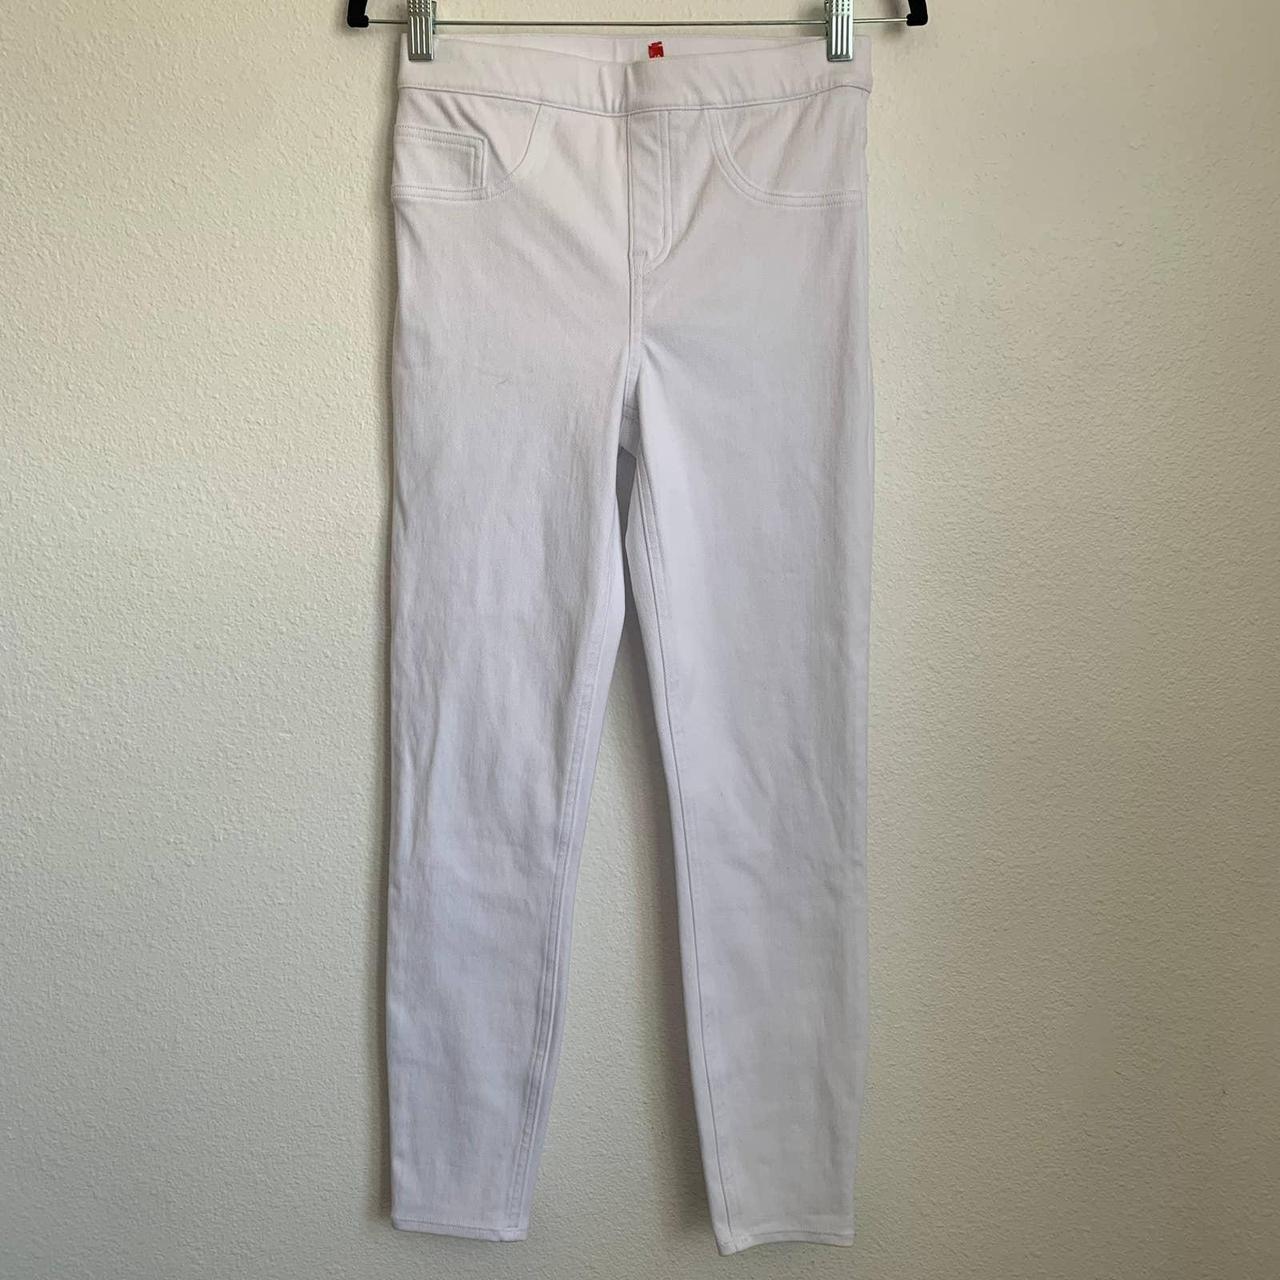 Spanx Skinny Jeans in White Size Small S Excellent, - Depop